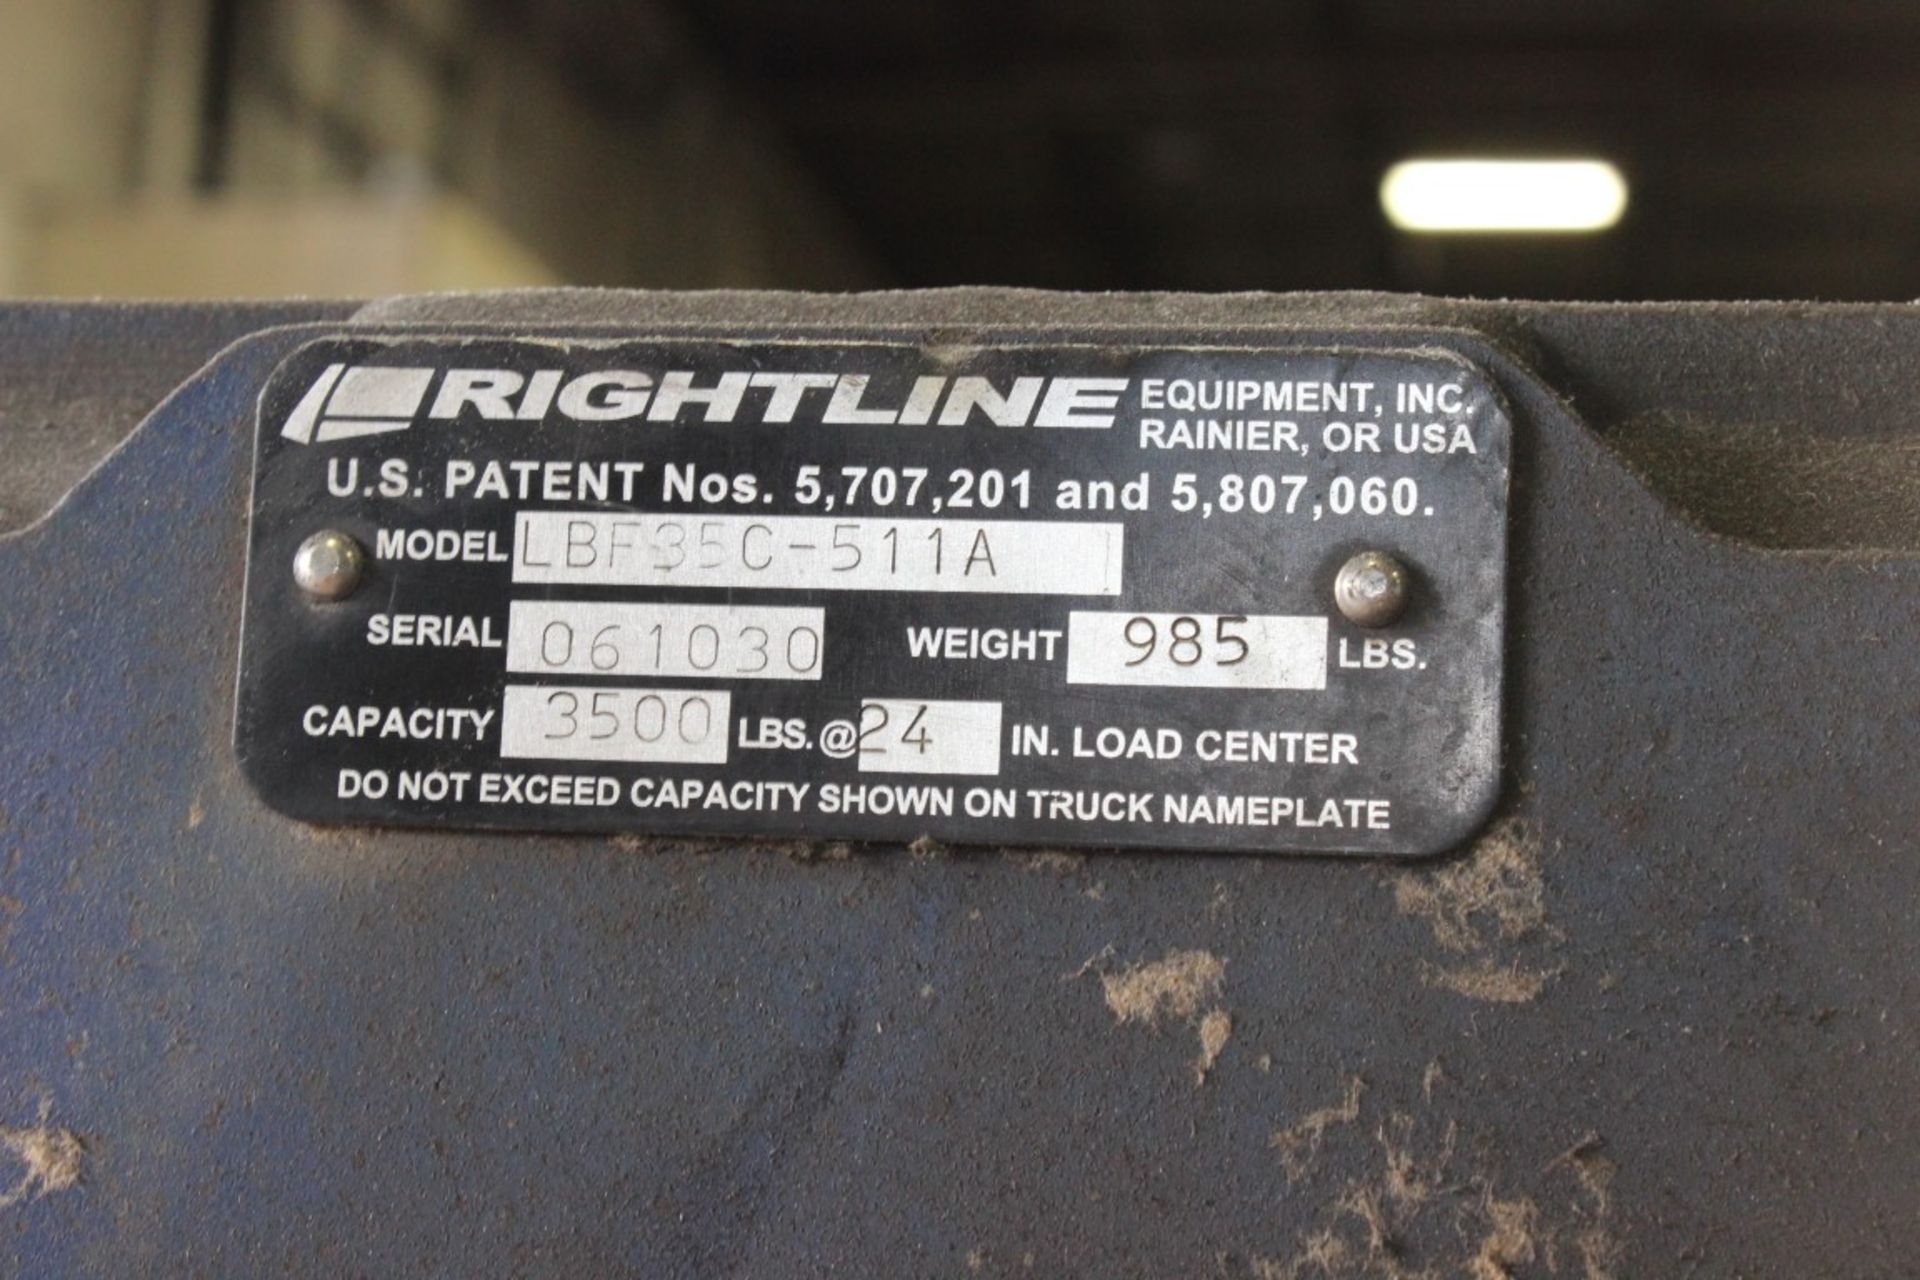 RIGHTLINE LBF-35C-511A BALE CLAMPS ATTACHMENT - Image 7 of 7